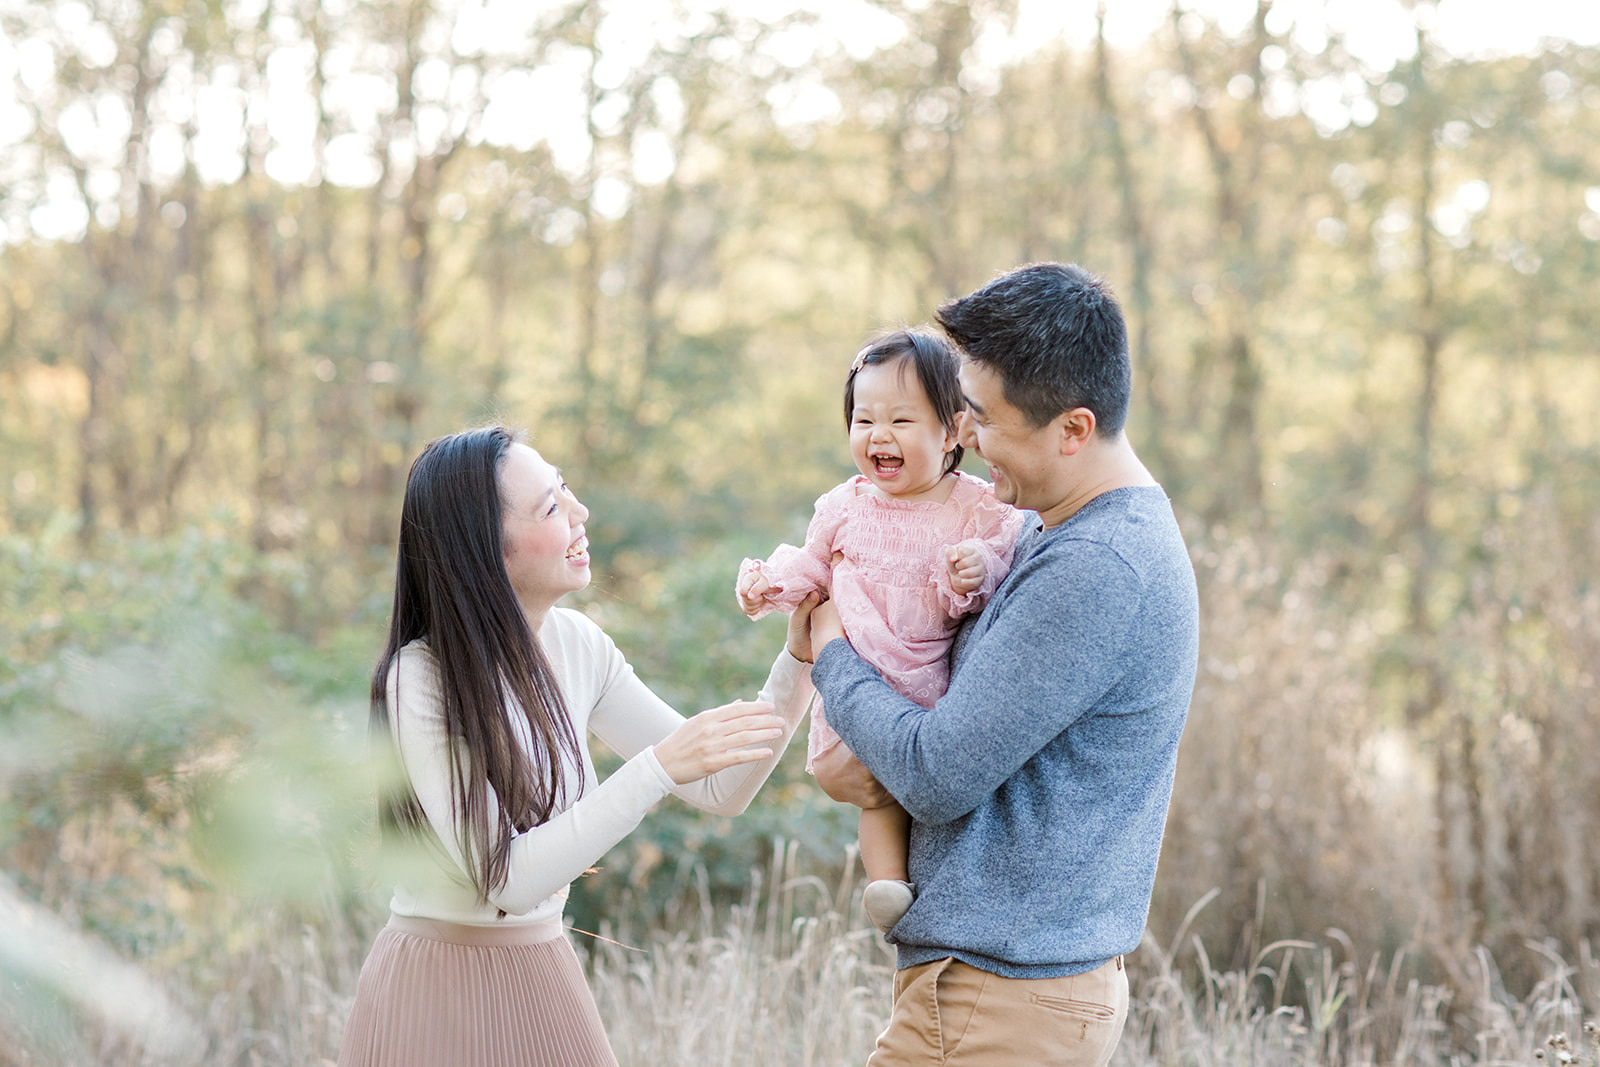 Family looks at each other lovingly and laughs during family photoshoot in Toronto, Ontario